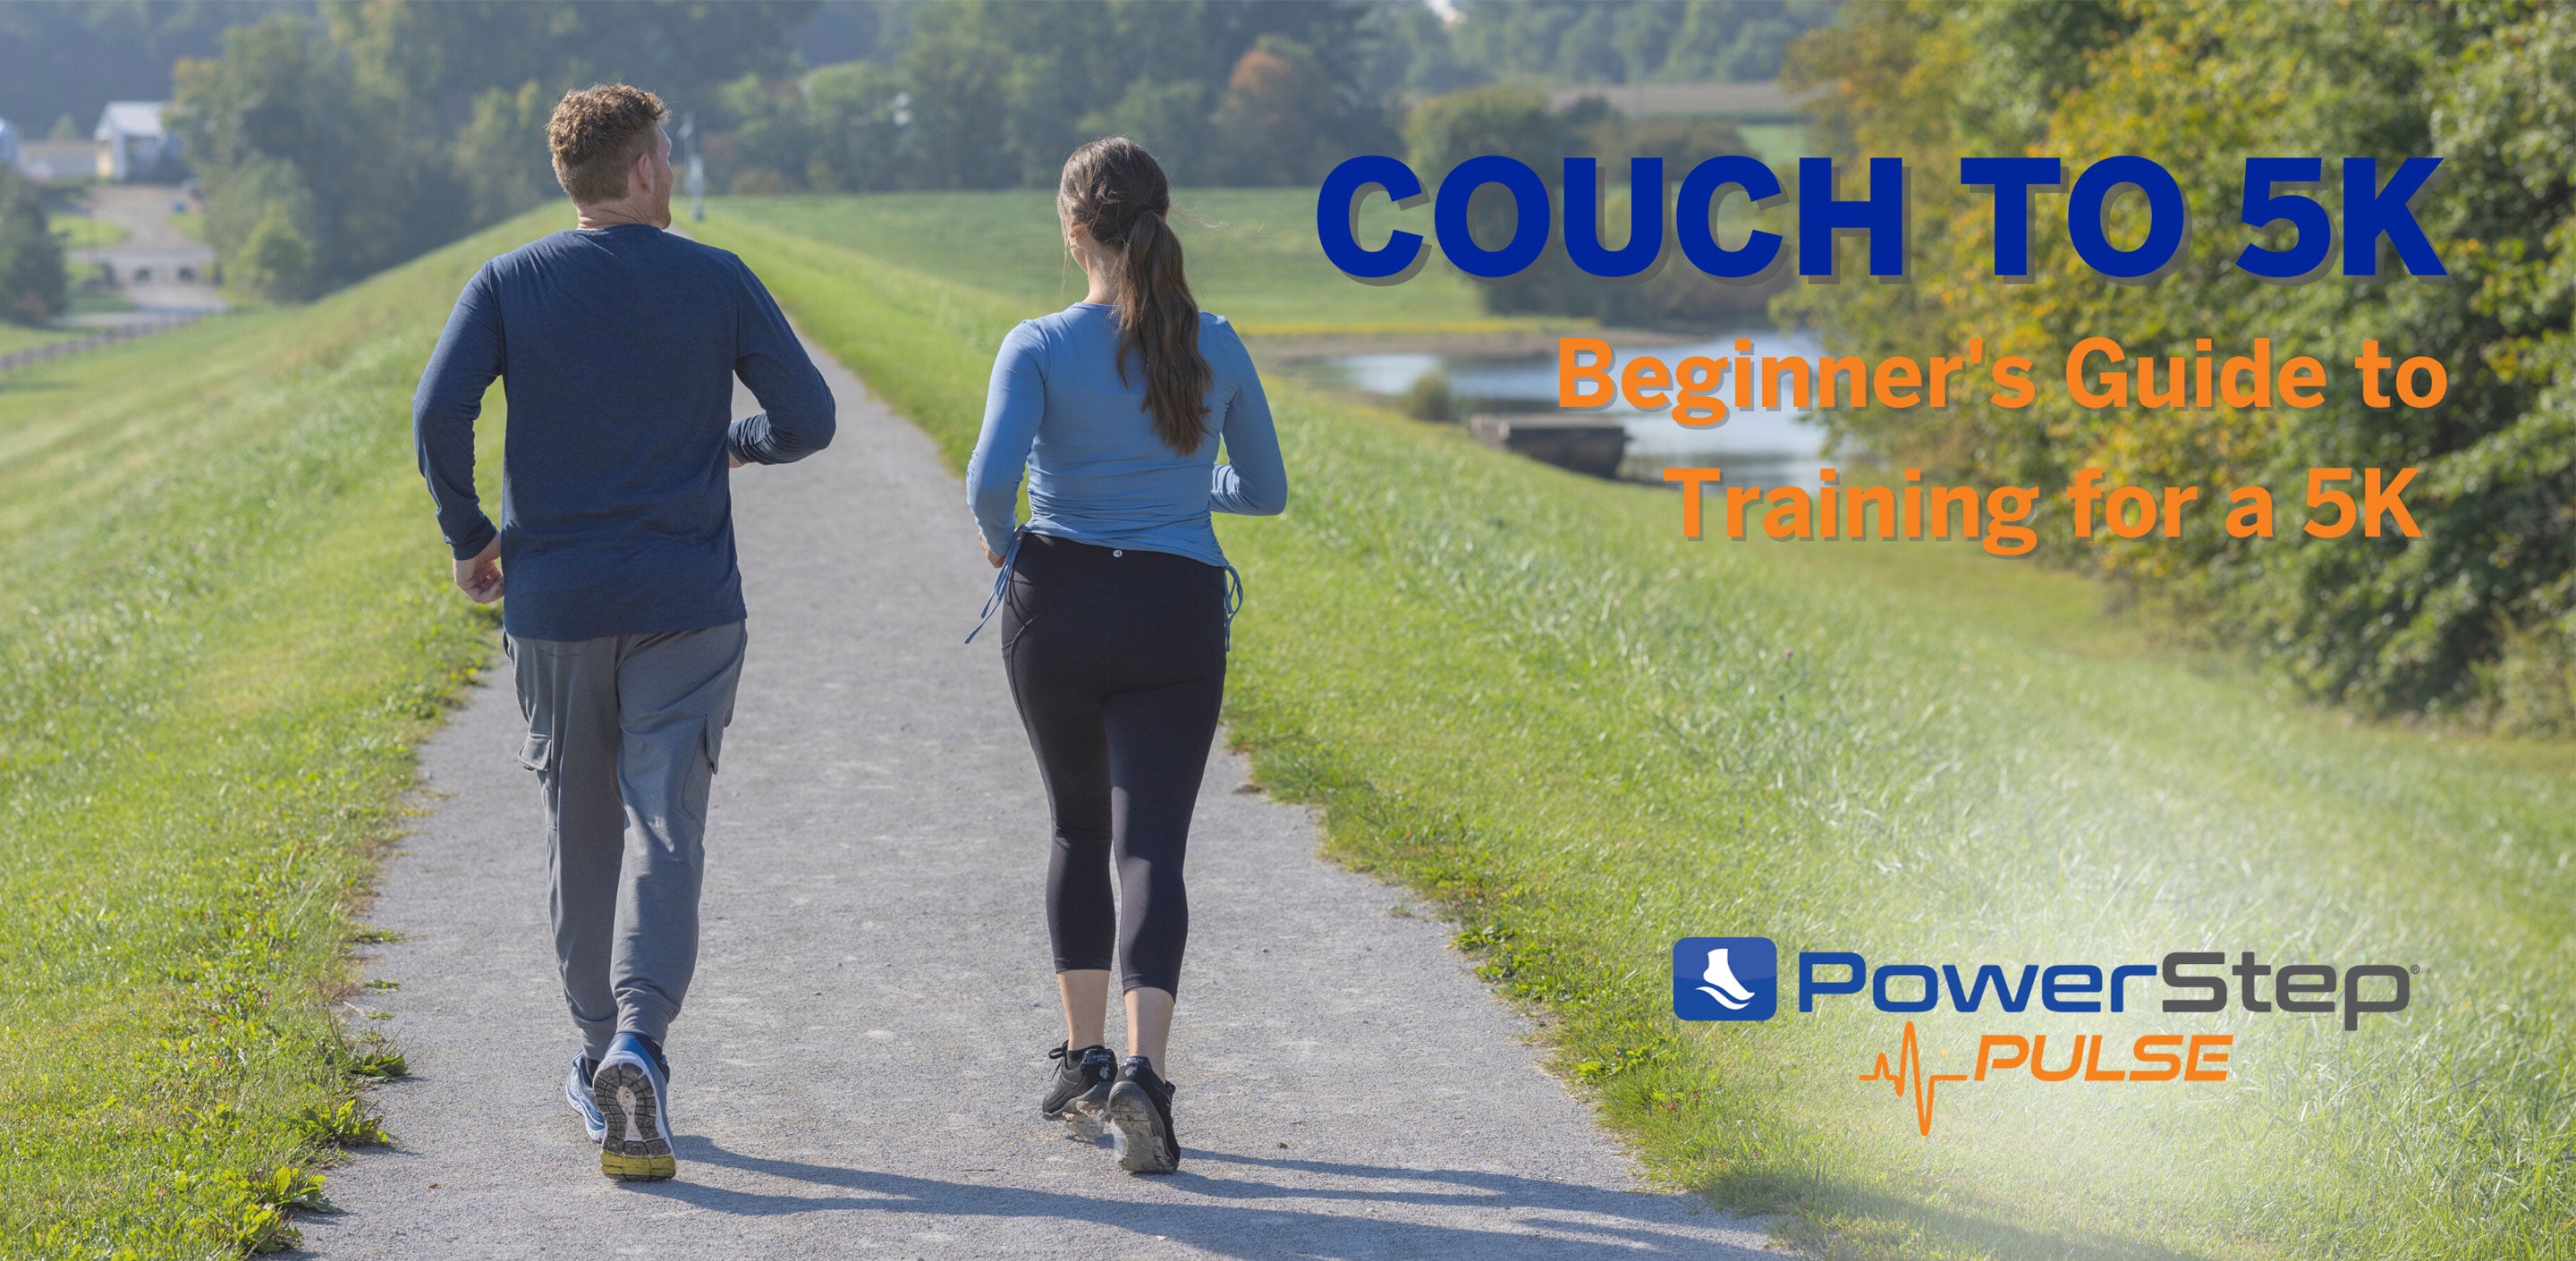 Get Off the Couch - Start Training for that 5k